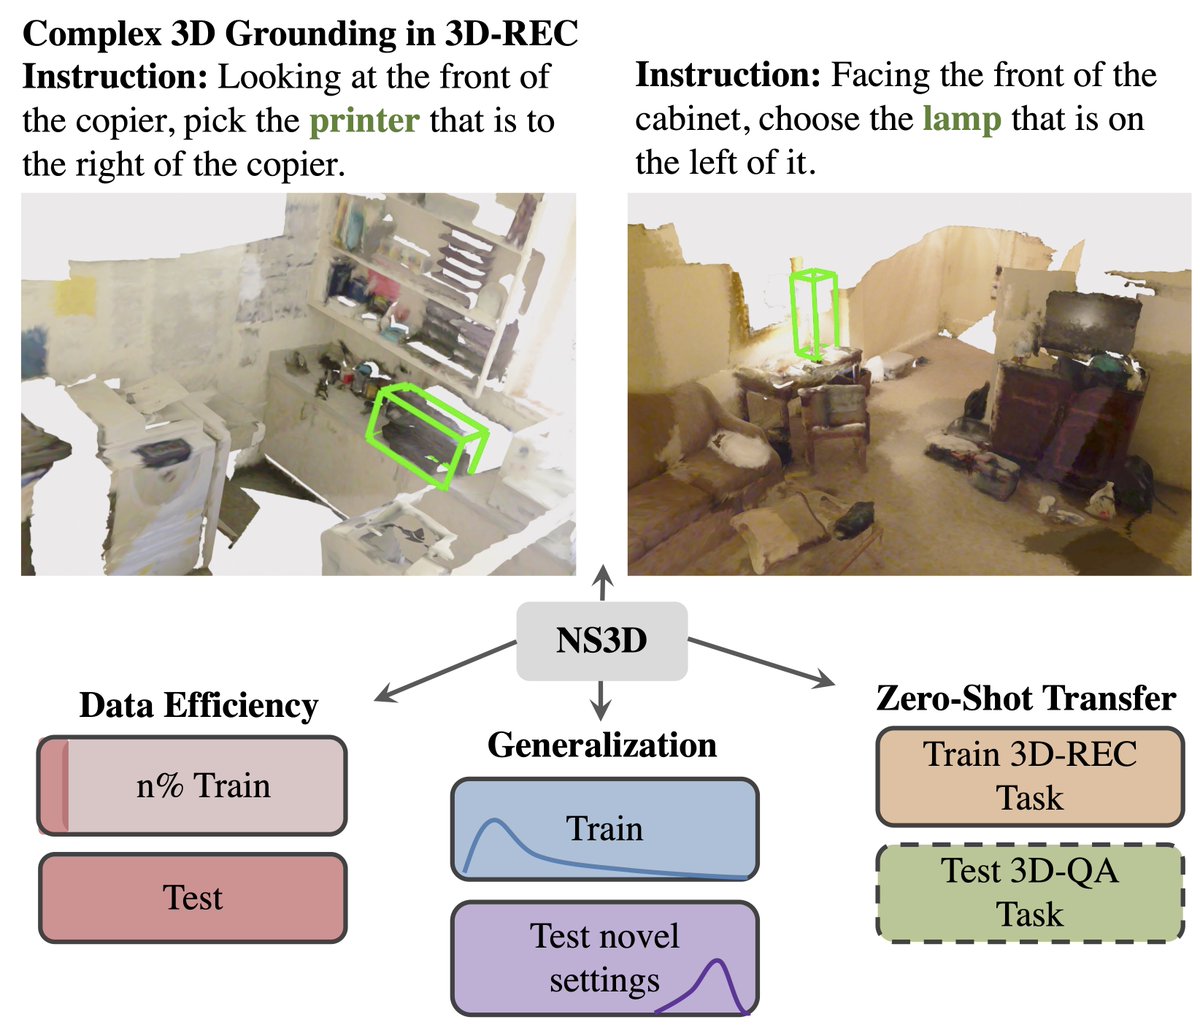 How can we build a modular and compositional system that understands 3D scenes? Excited to introduce our @CVPR paper — NS3D: Neuro-Symbolic Grounding of 3D Objects and Relations, w @maojiayuan and @jiajunwu_cs . Check out our poster next week at Tue-AM-249.